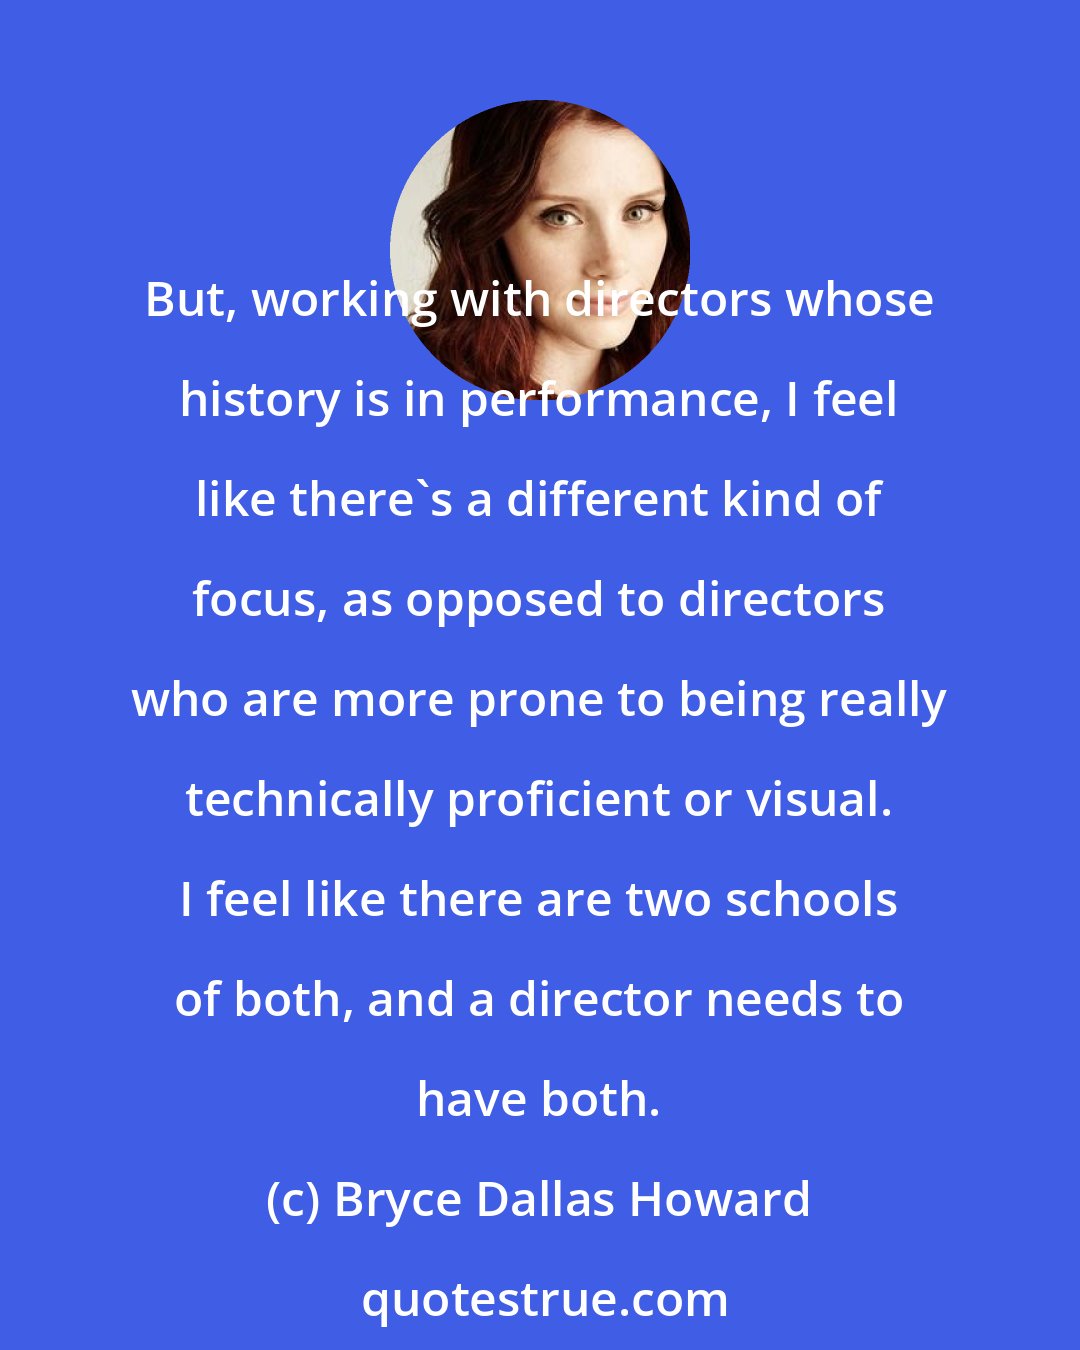 Bryce Dallas Howard: But, working with directors whose history is in performance, I feel like there's a different kind of focus, as opposed to directors who are more prone to being really technically proficient or visual. I feel like there are two schools of both, and a director needs to have both.